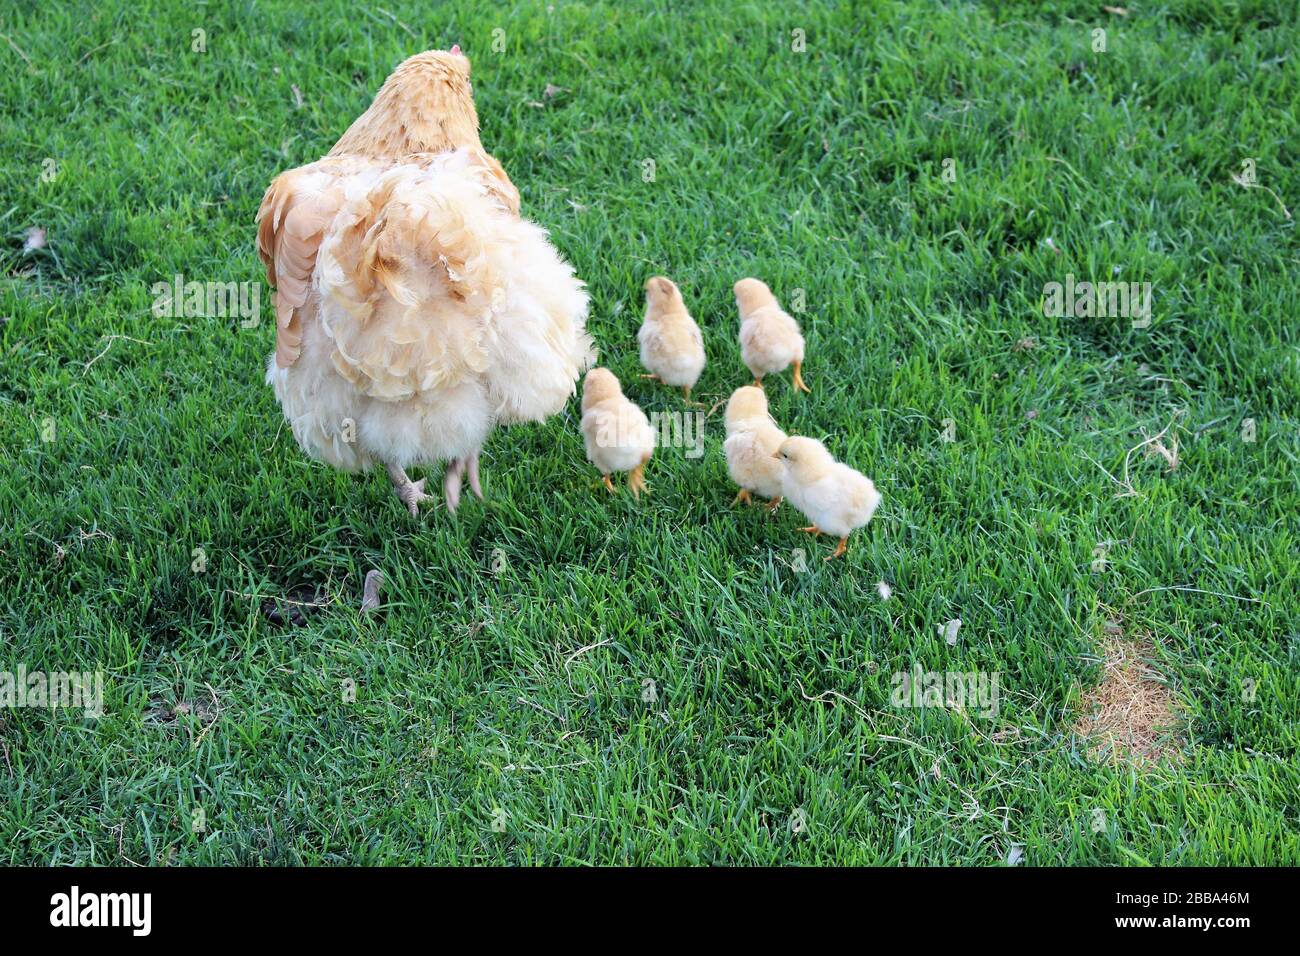 Mother Hen on an outing with her chicks Stock Photo